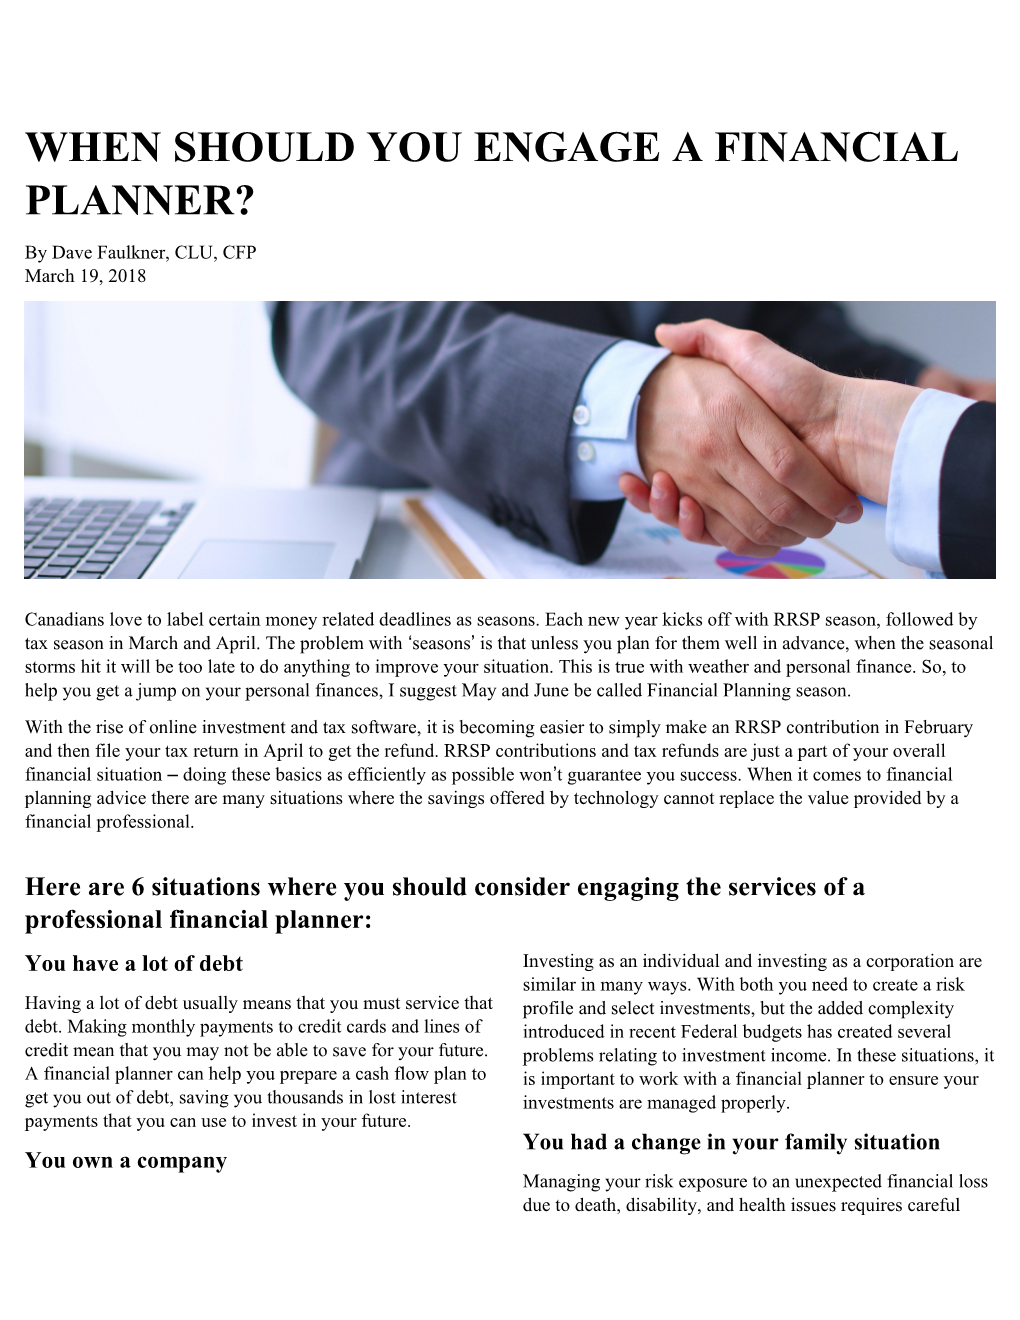 When Should You Engage a Financial Planner?